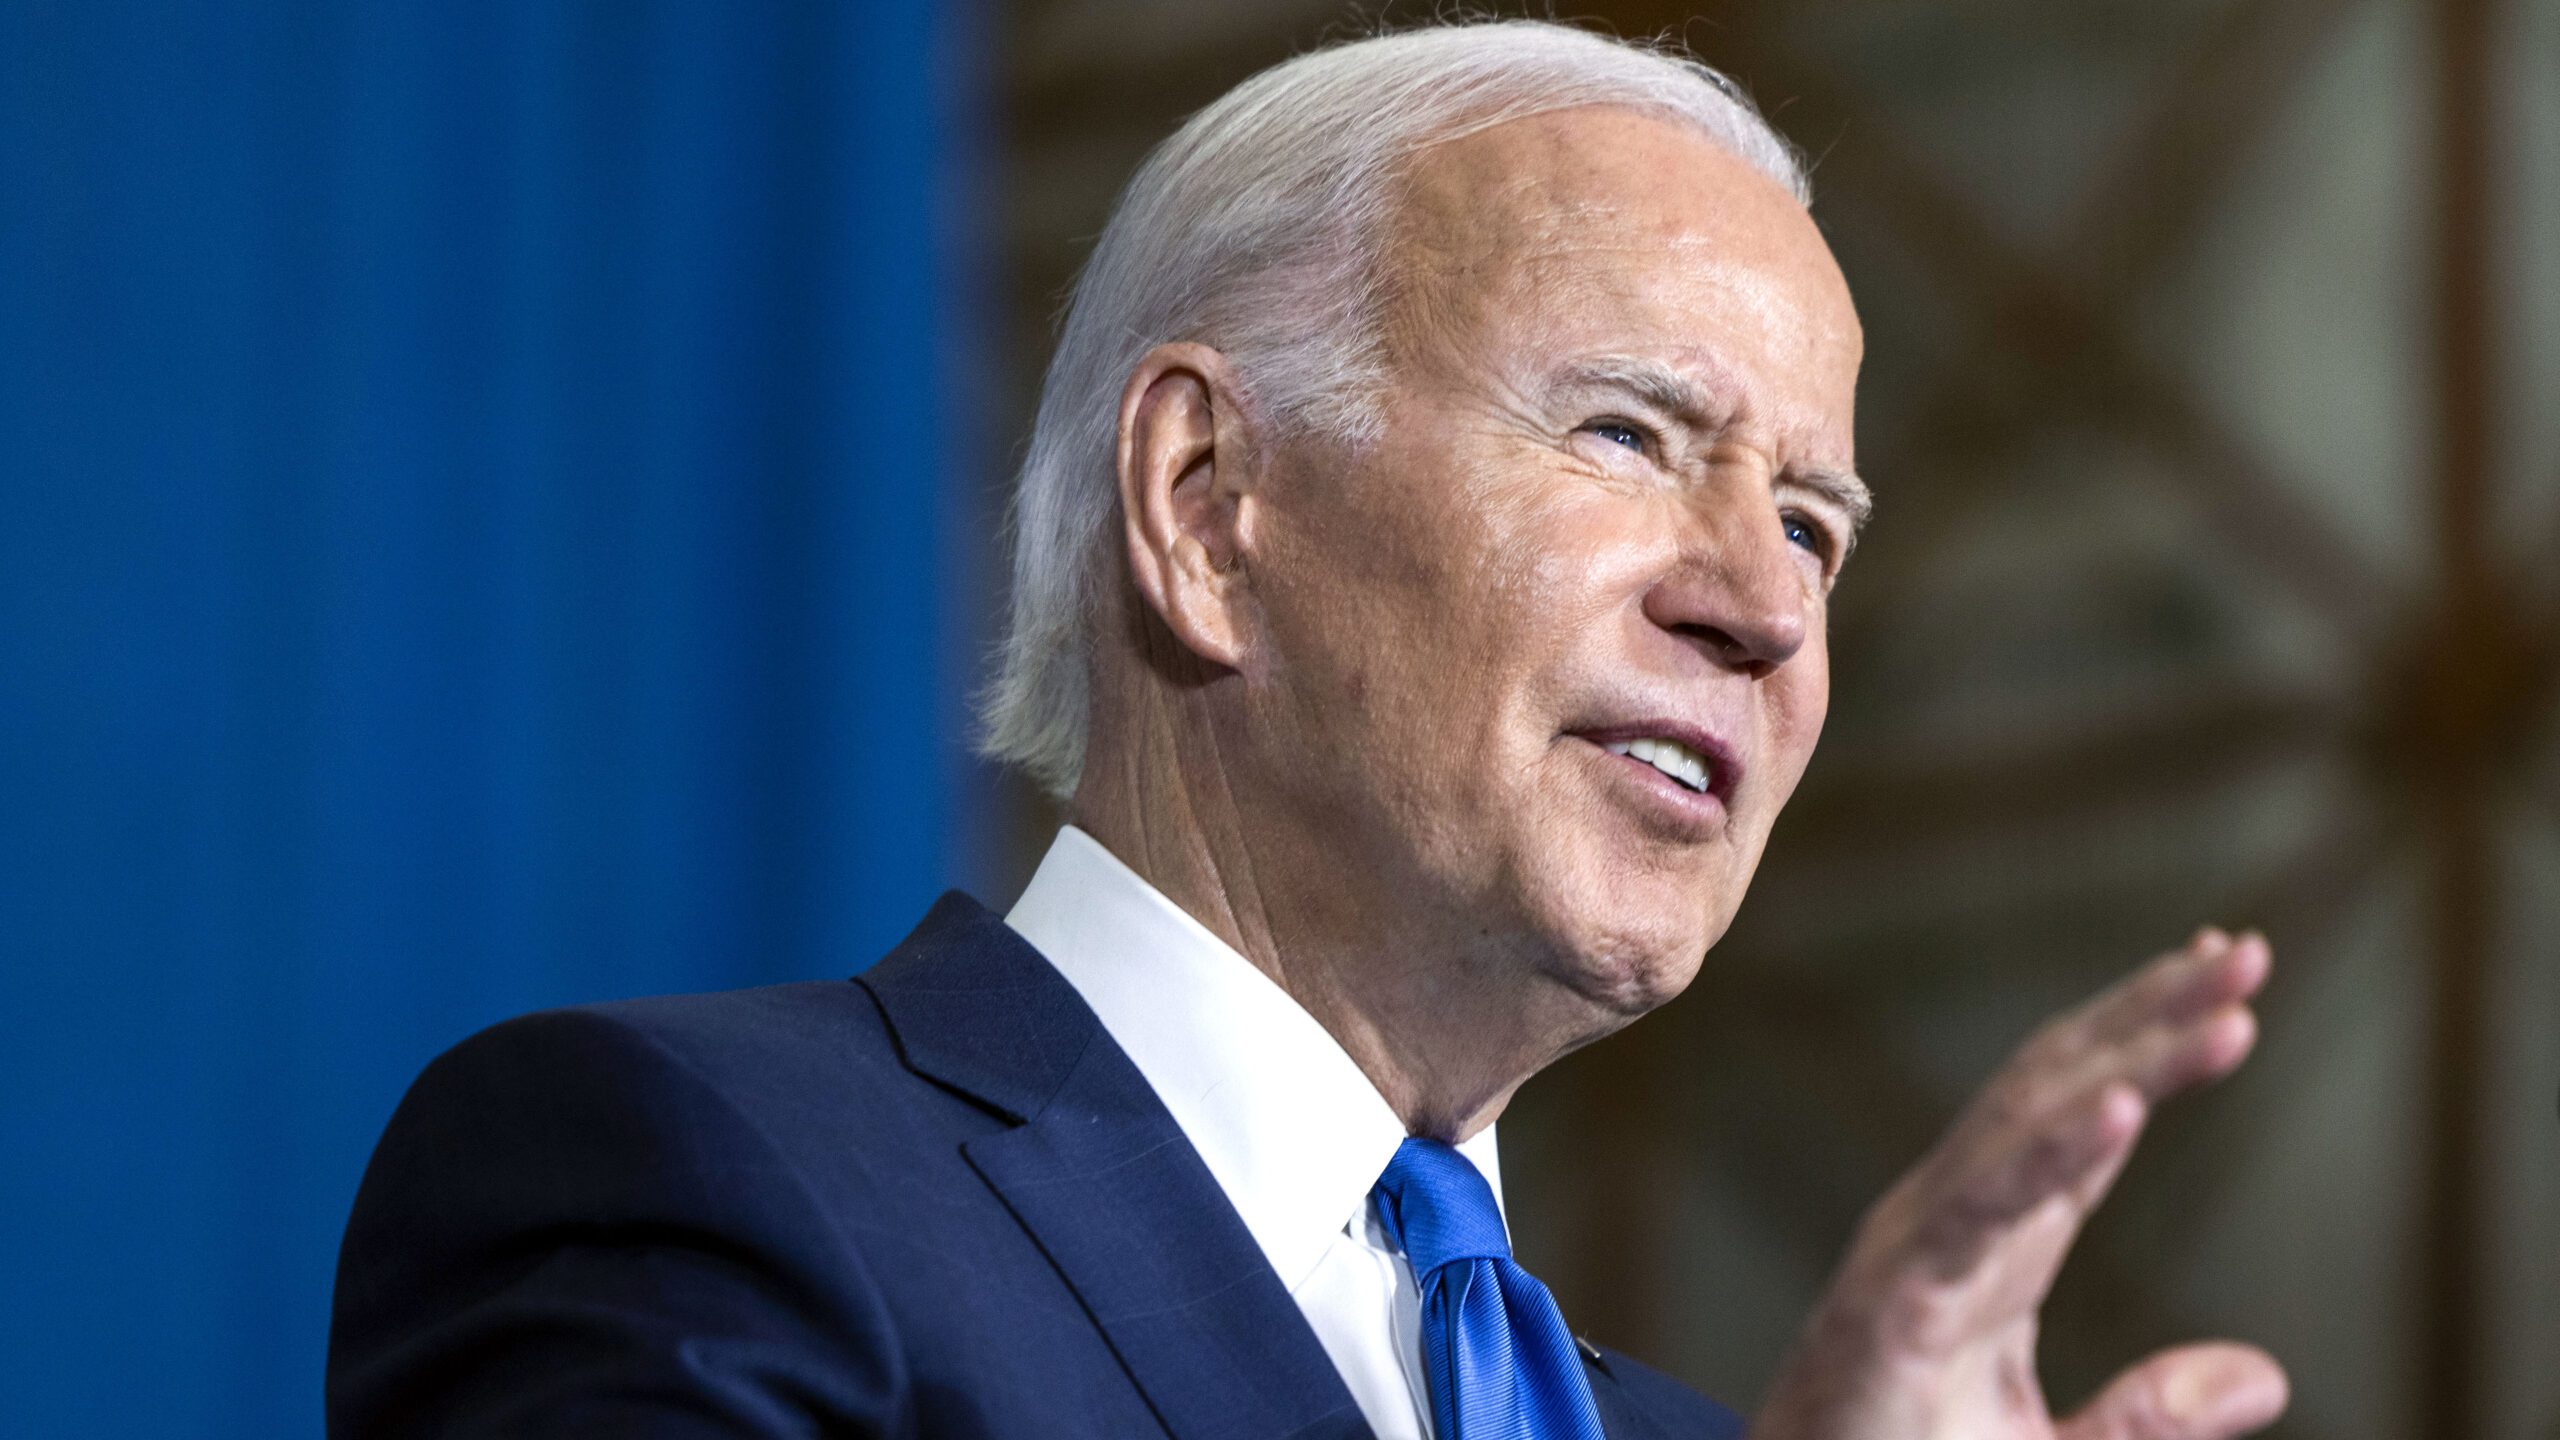 biden,-calling-for-americans-to-unite,-demonizes-republicans-as-a-threat-to-democracy